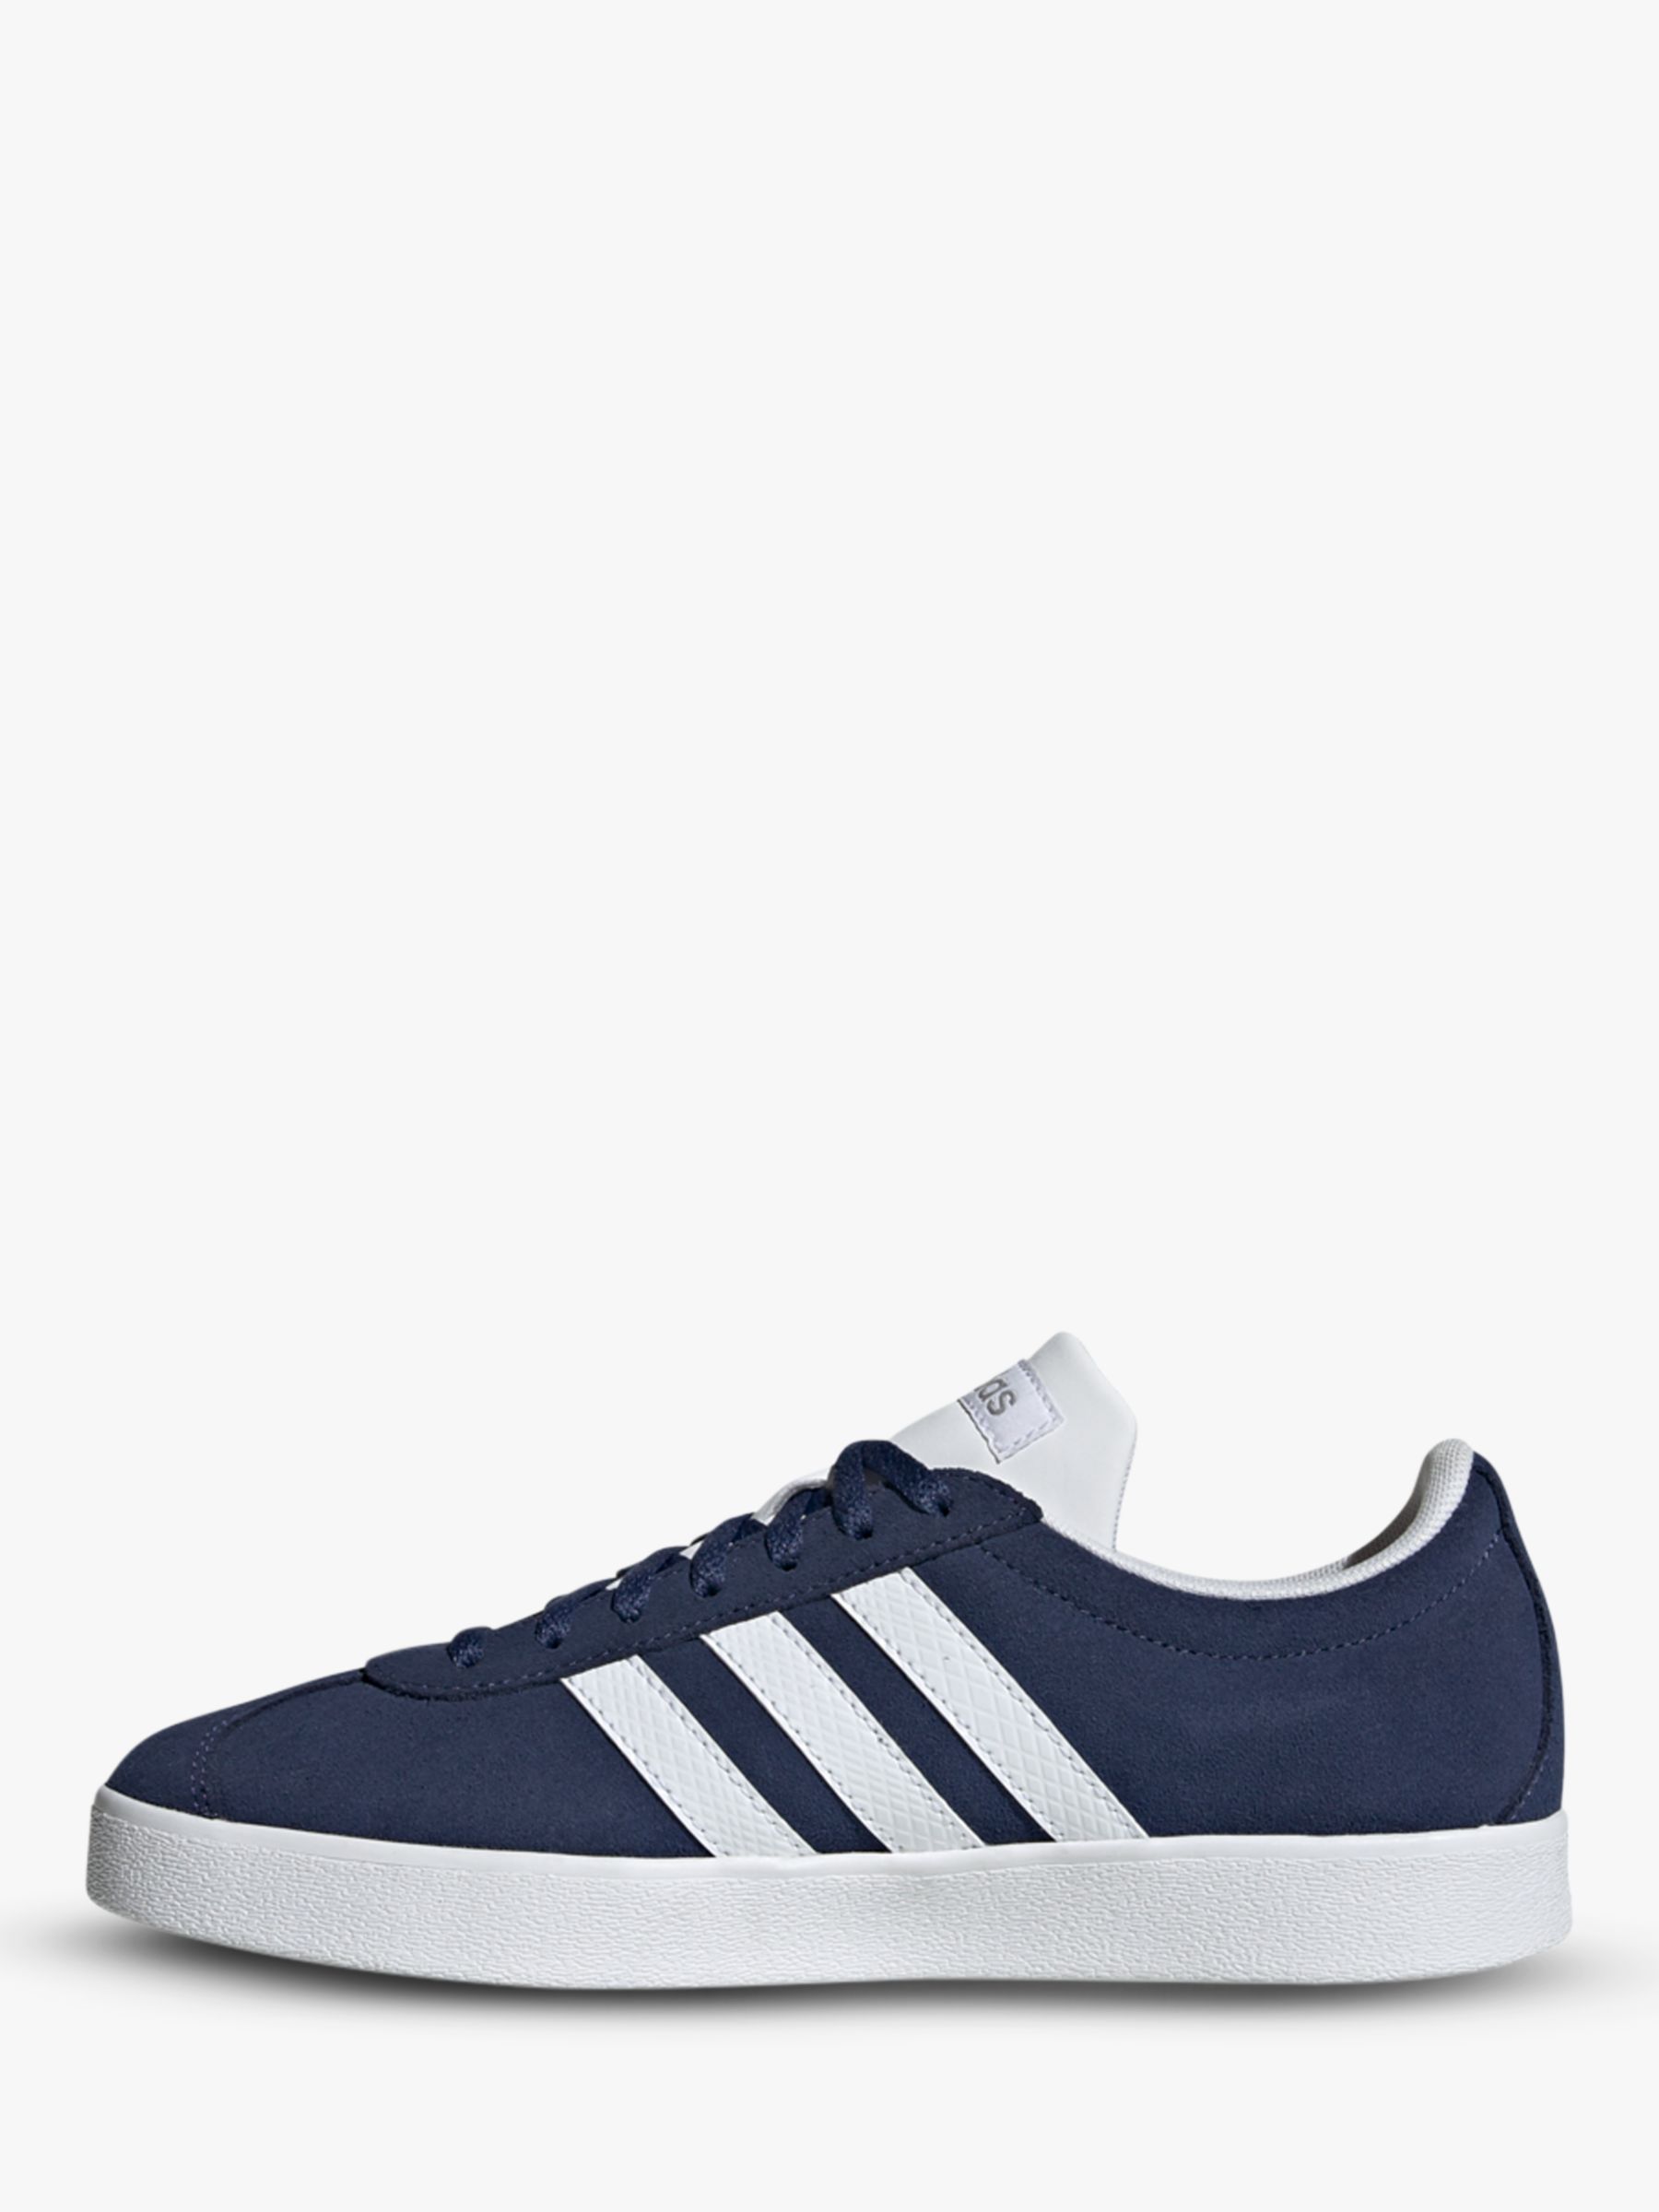 adidas VL Court Suede Trainers, Tech Indigo at John Lewis & Partners